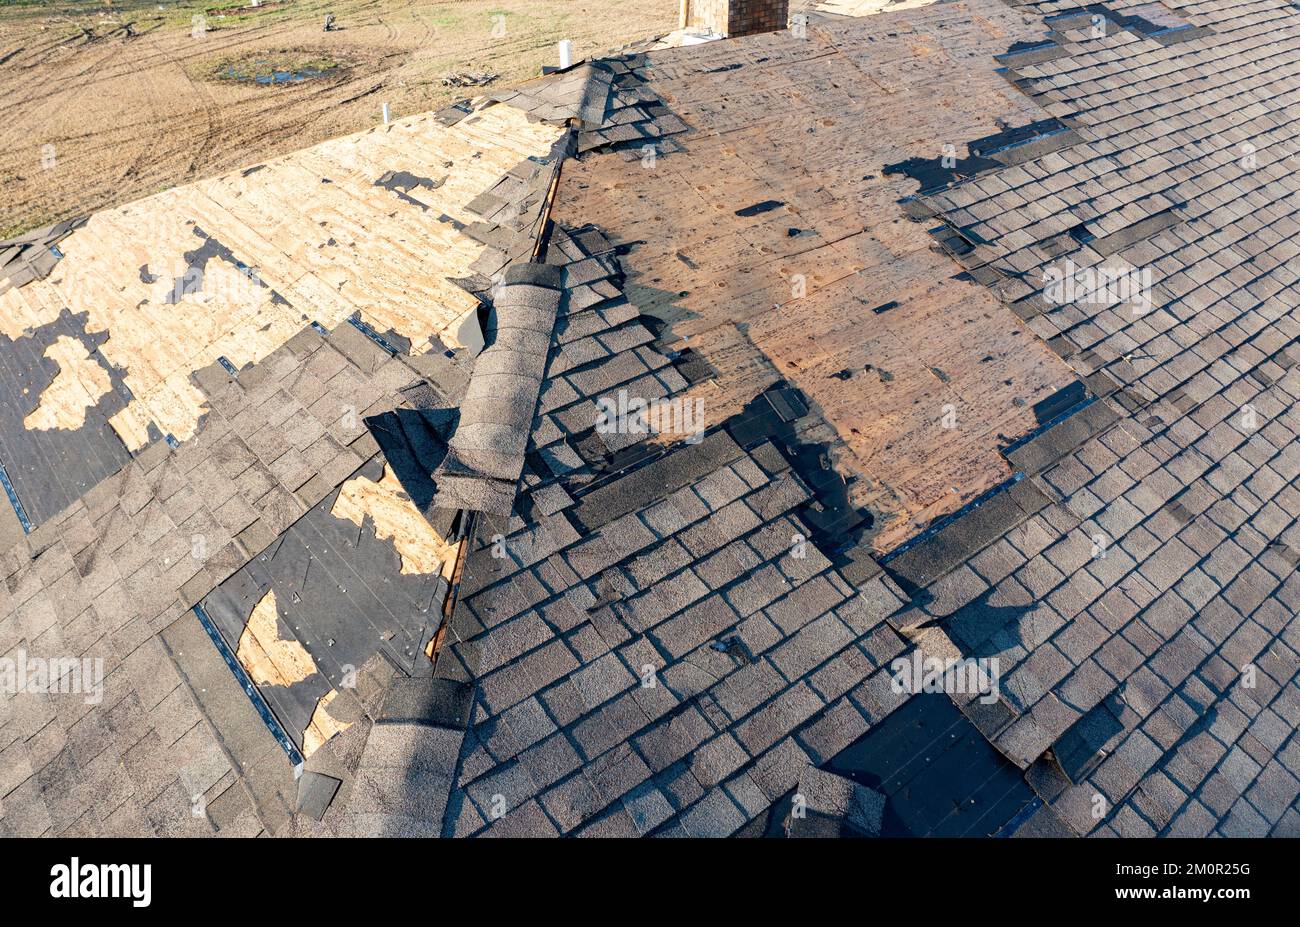 Tornado damage to roof and shingles. Stock Photo